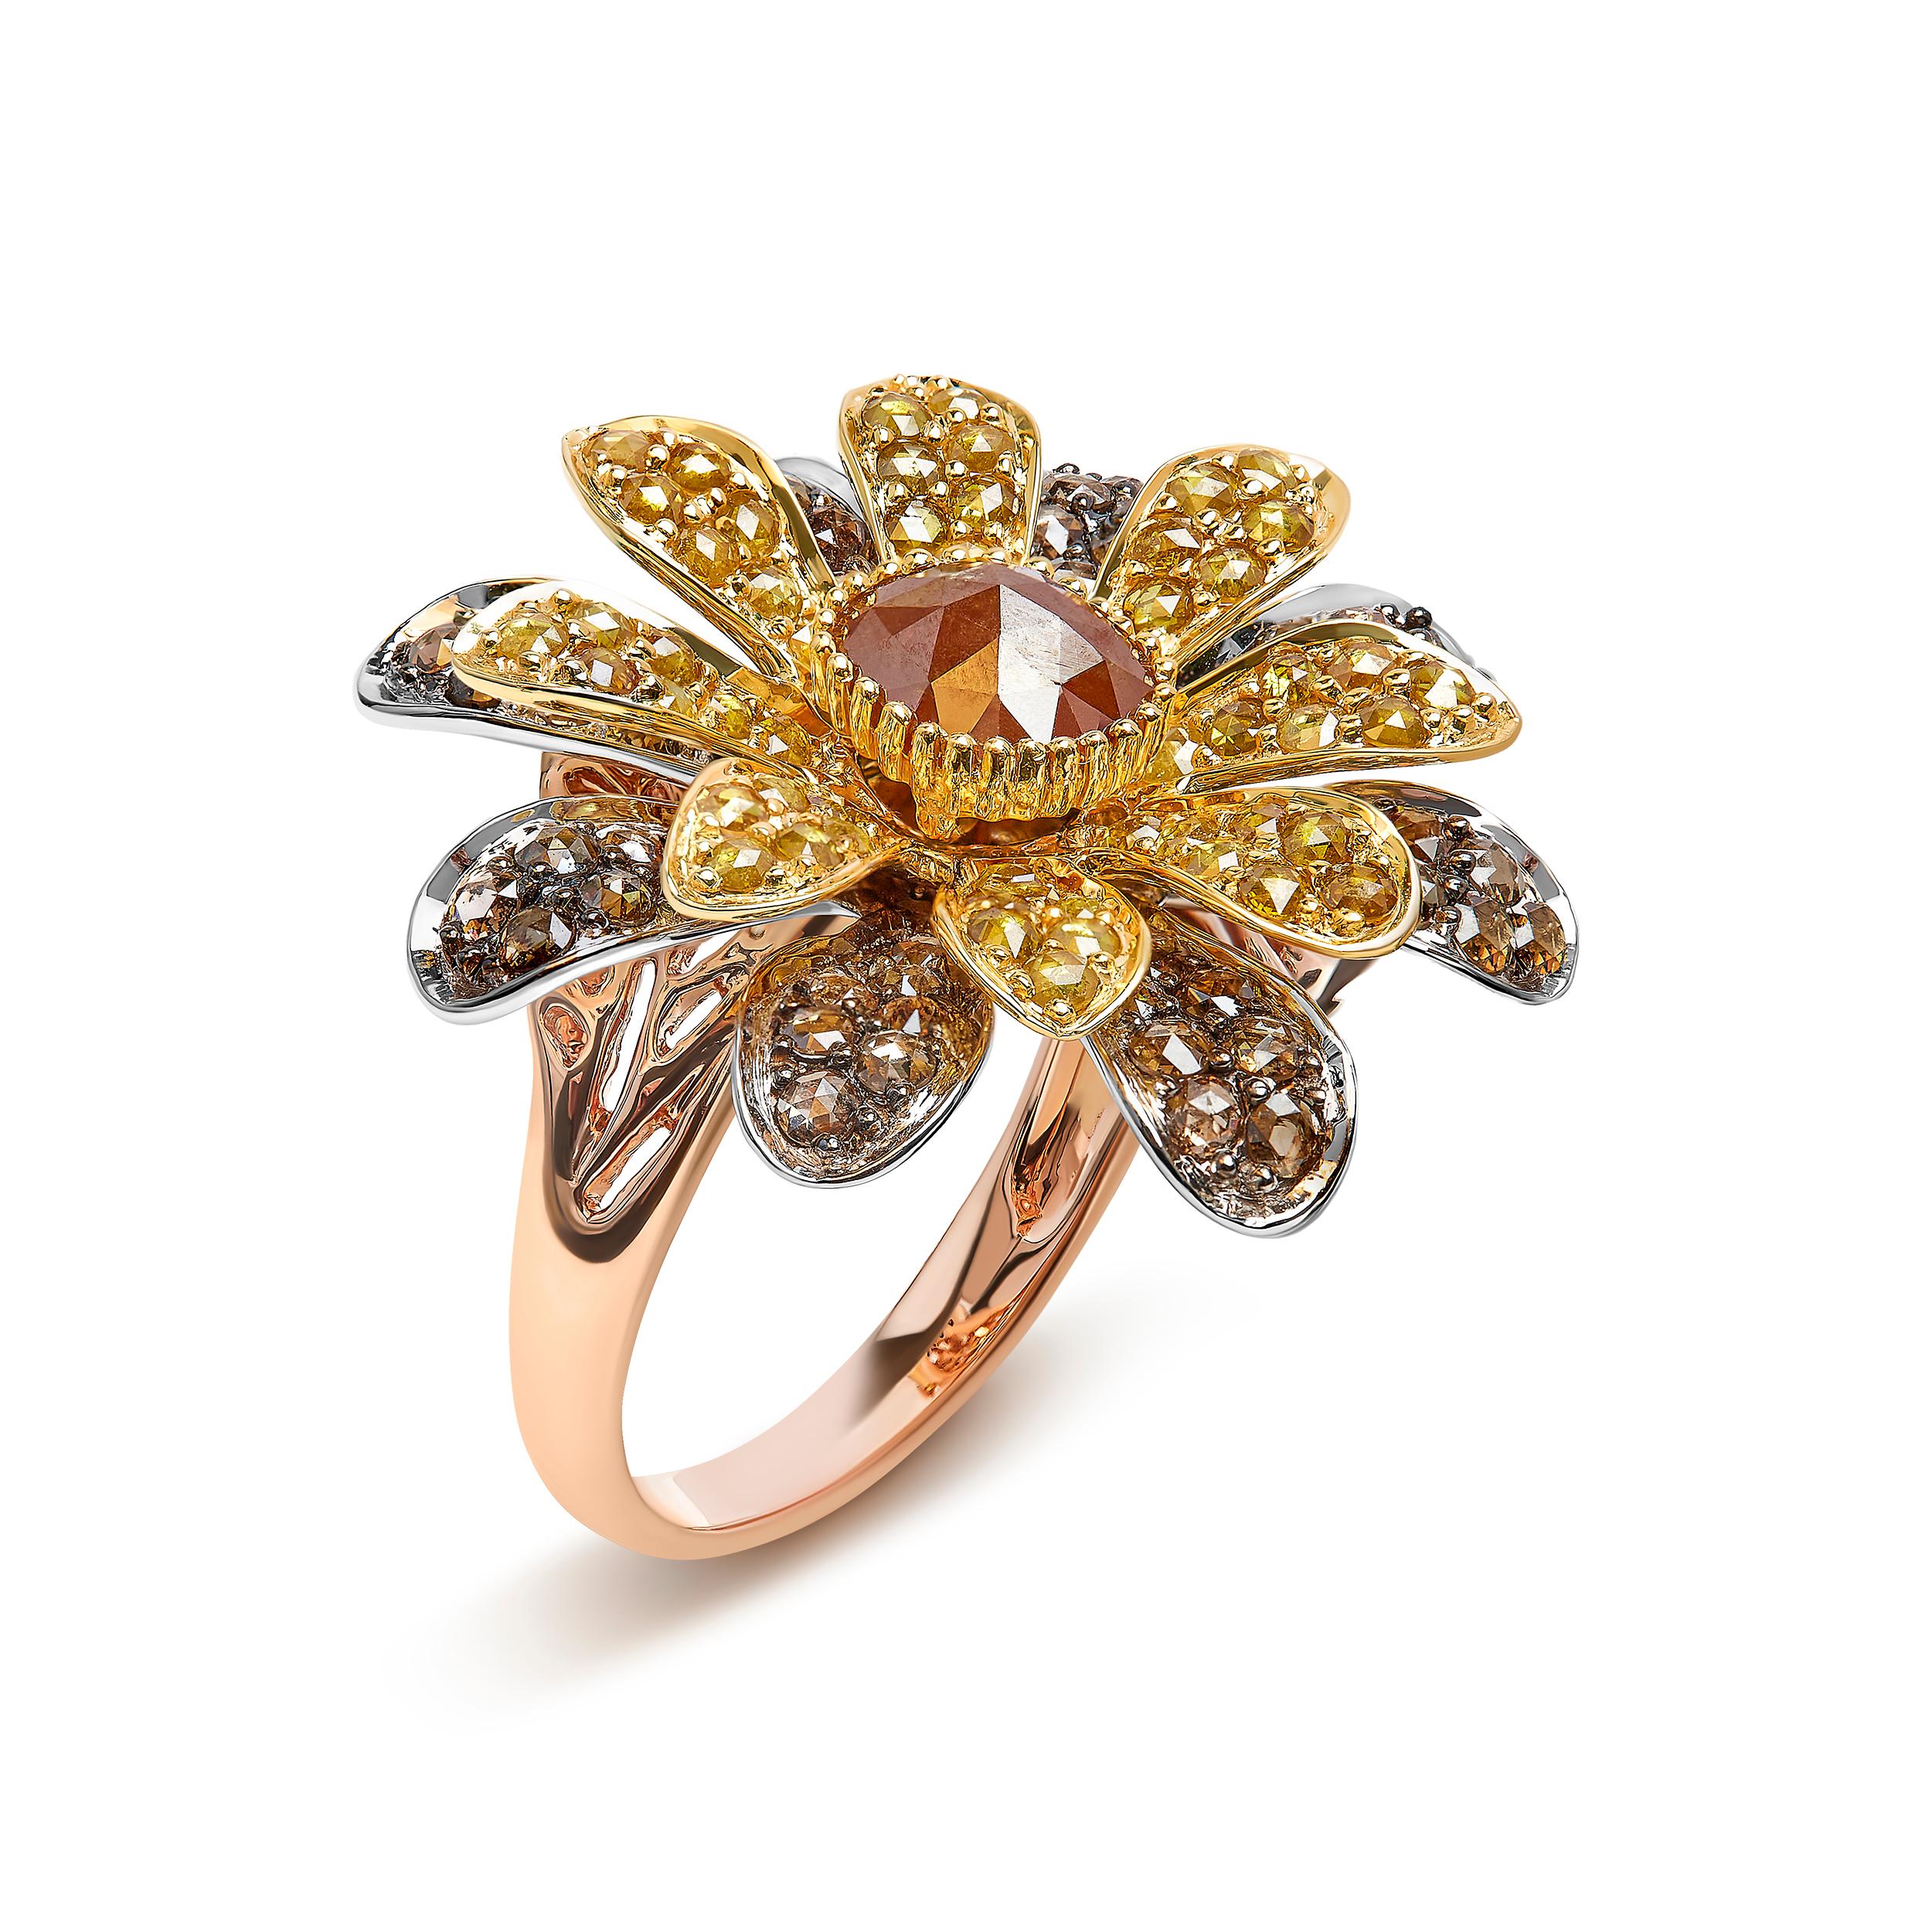 Modern 14K Tri-Toned 3 7/8 Carat Diamond Cocktail Double Flower and Petal Cocktail Ring For Sale